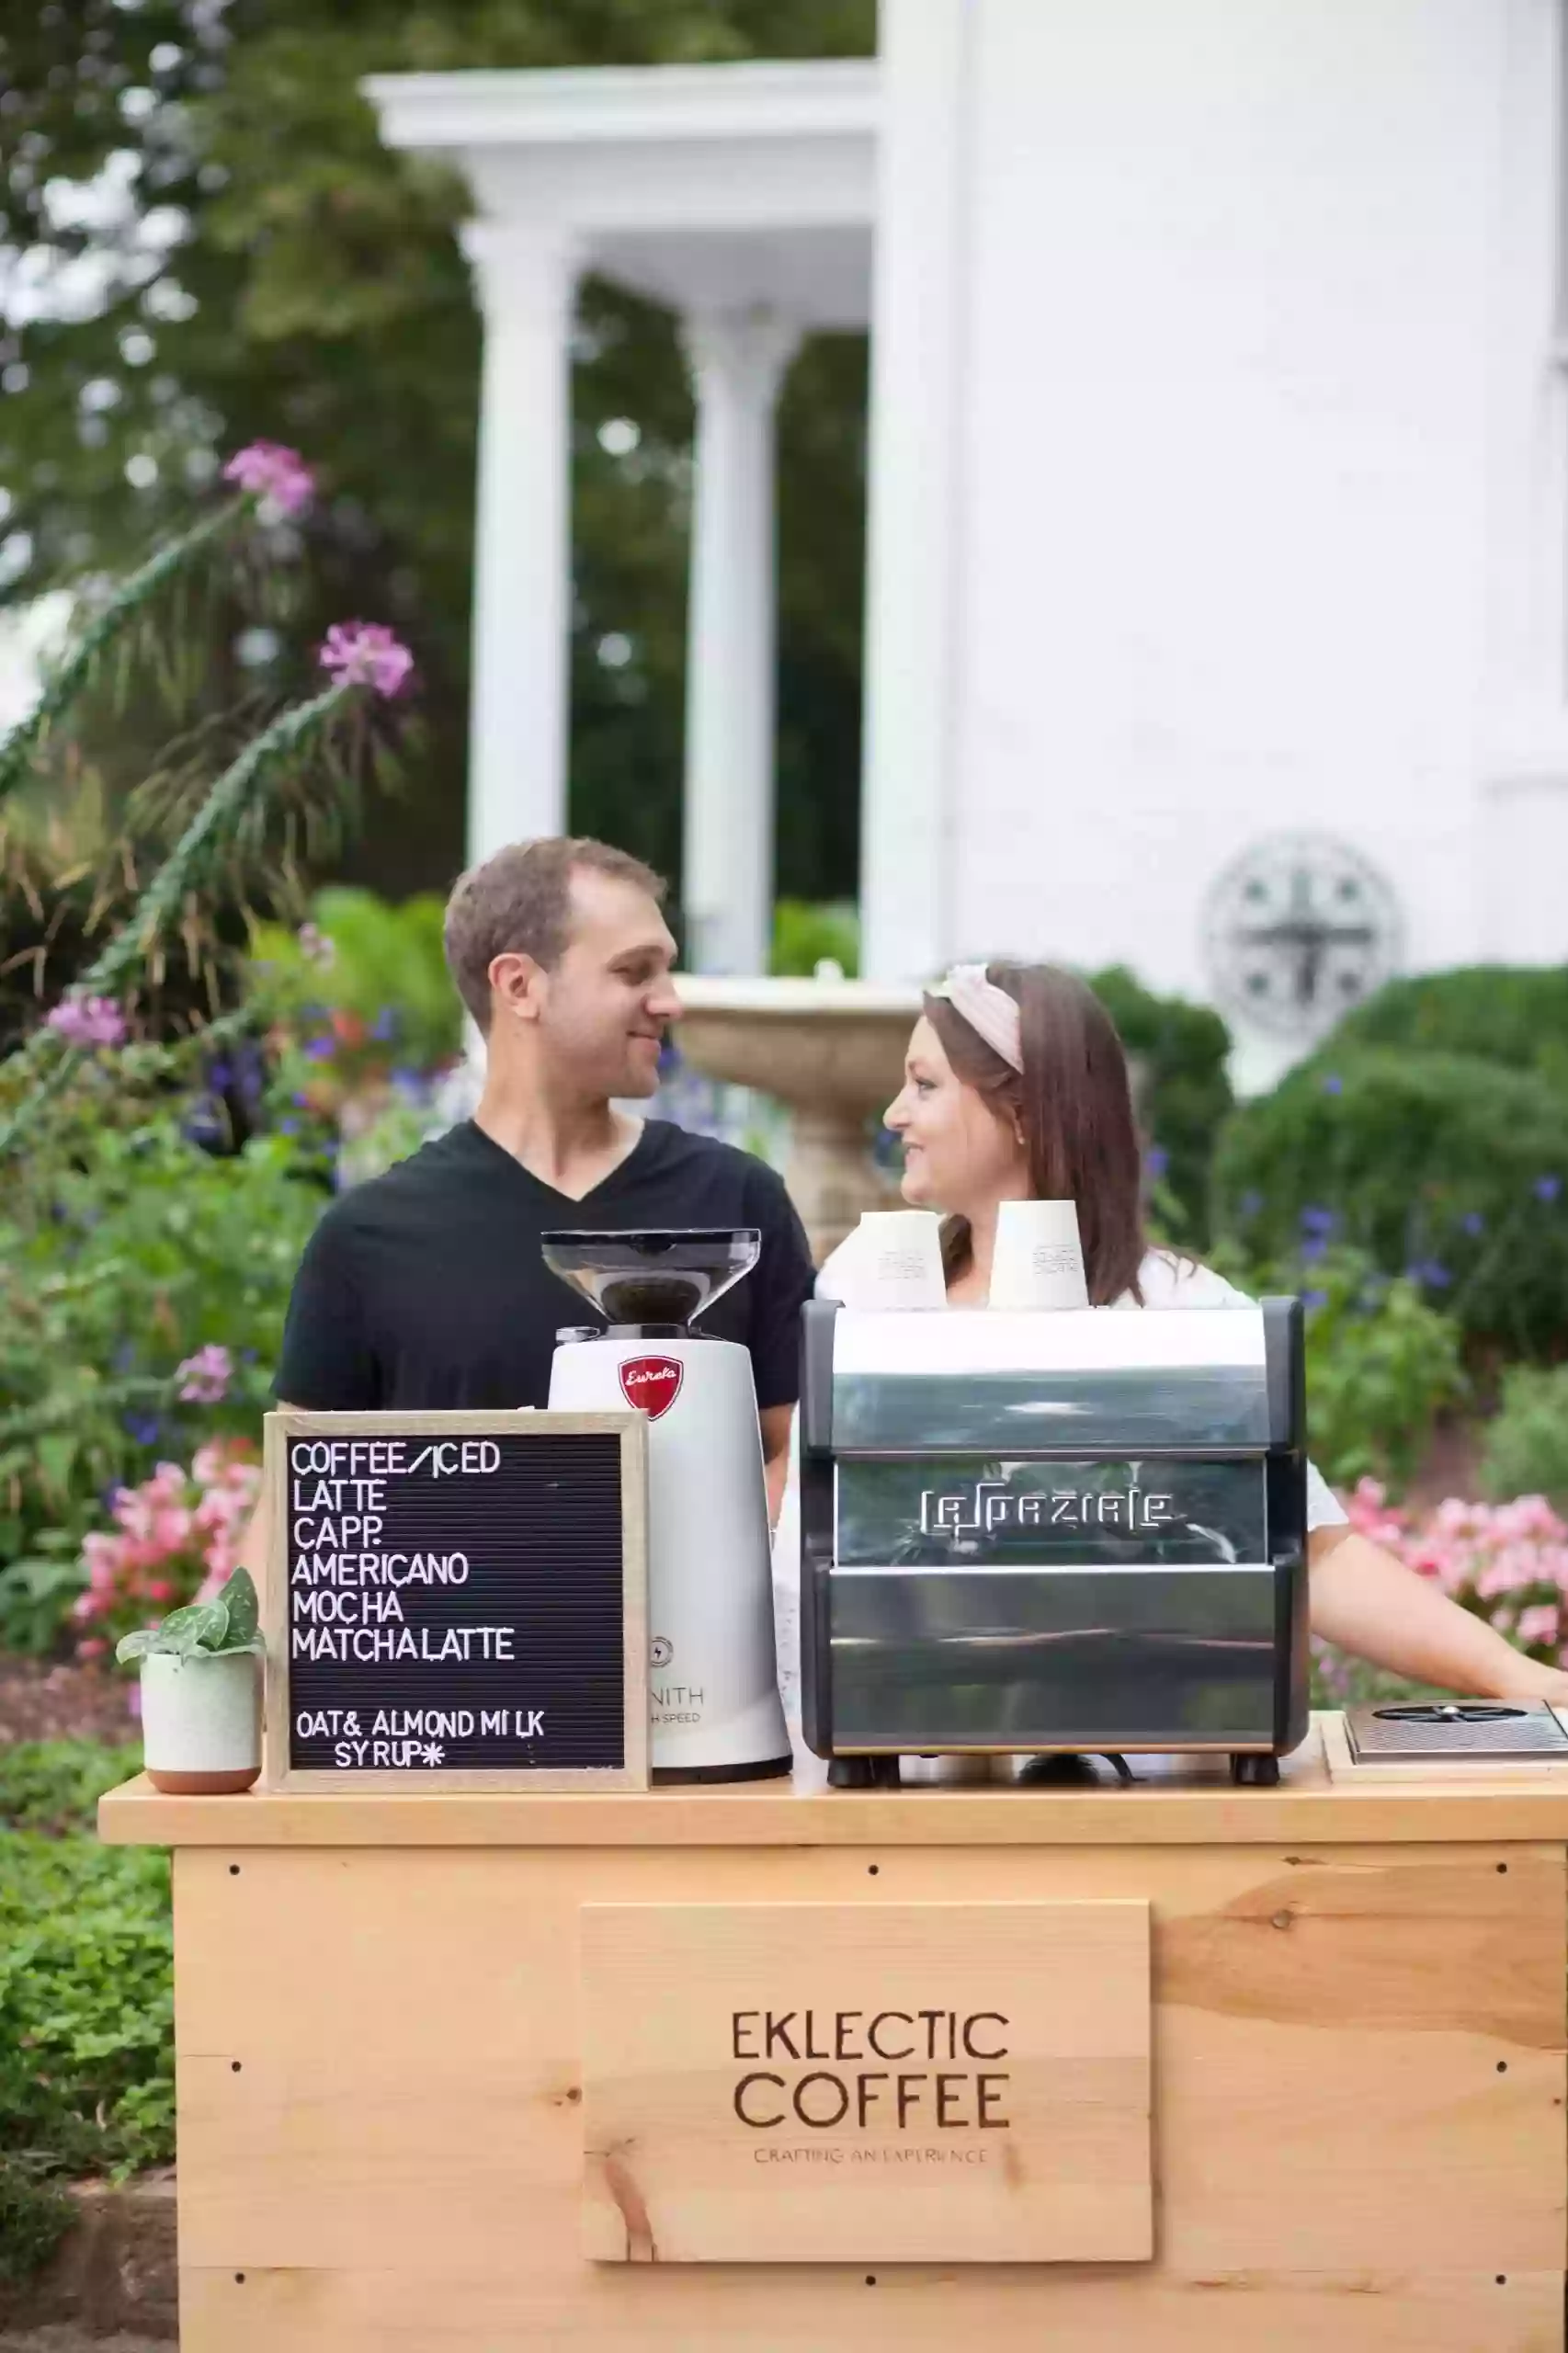 Eklectic Coffee Bar - a mobile catering coffee experience